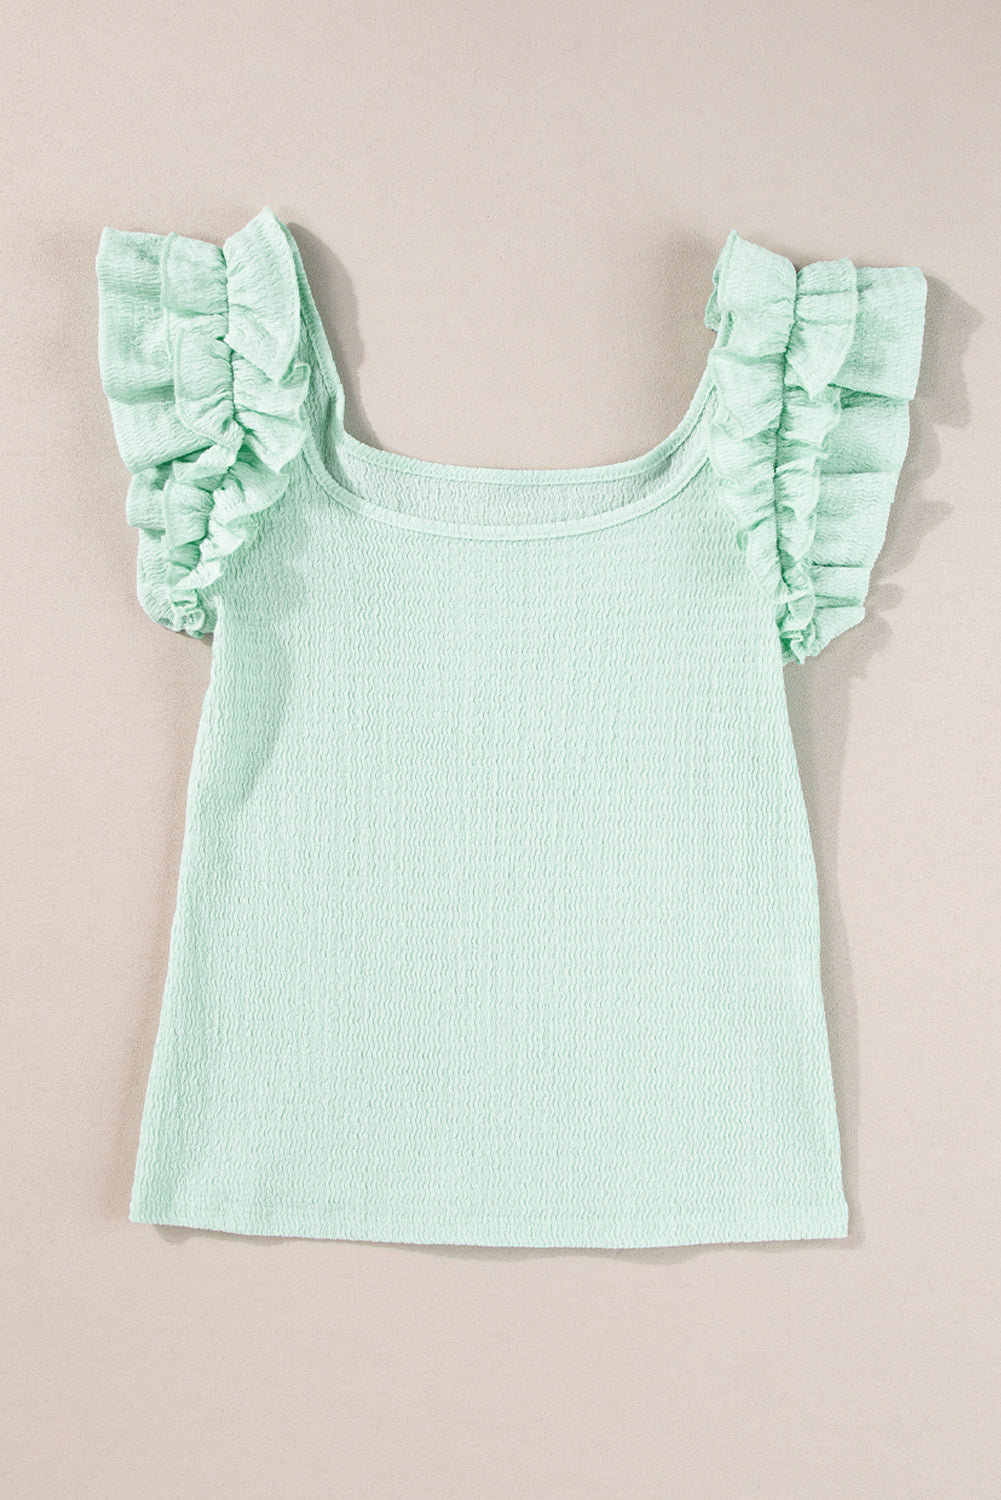 Clearly Aqua Ruffle Strap Crinkle Textured Tank Top